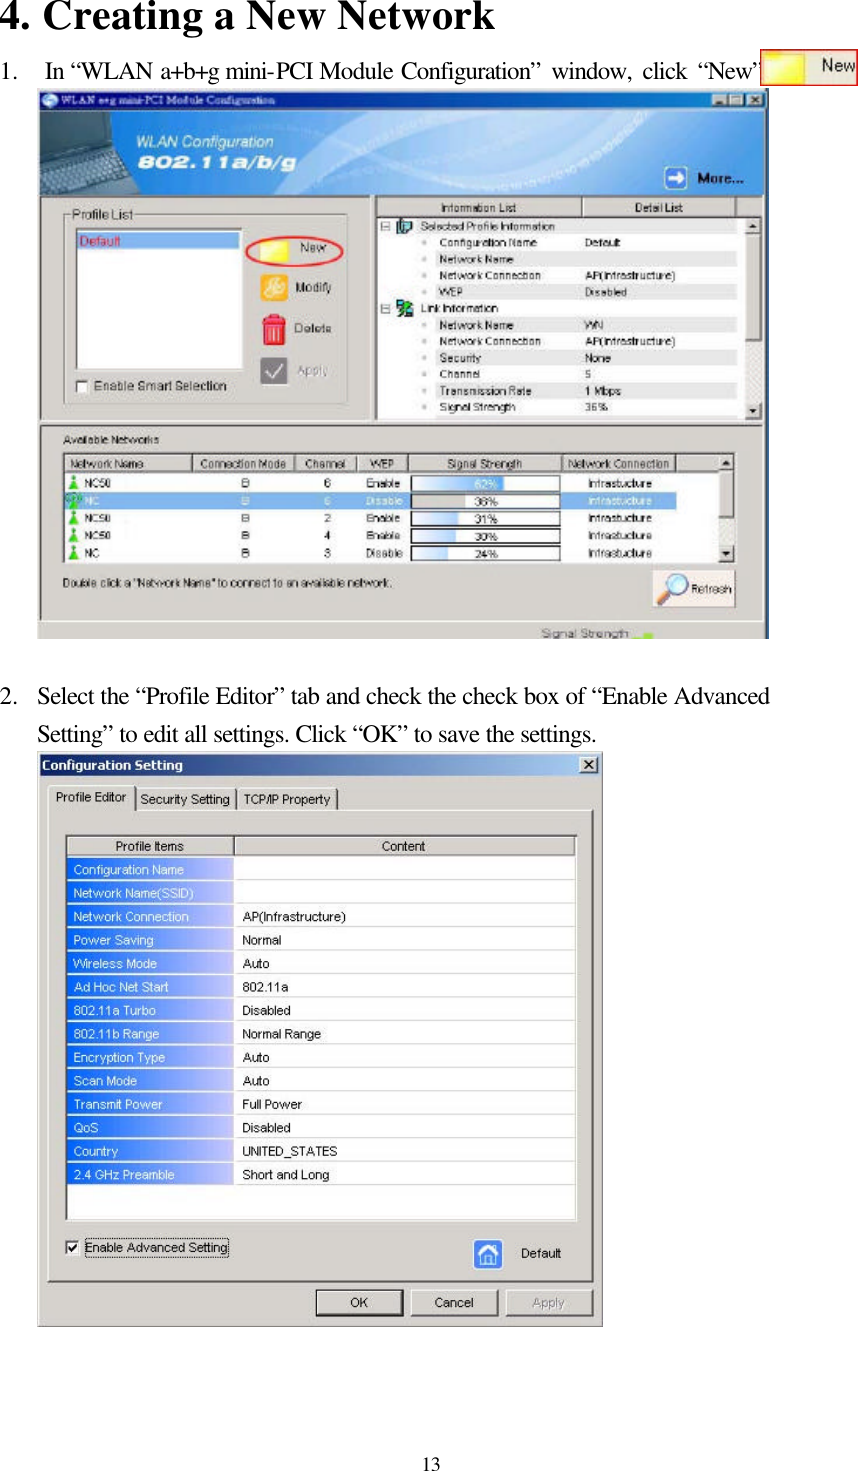  13 4. Creating a New Network 1.  In “WLAN a+b+g mini-PCI Module Configuration” window, click “New”       ..   2.  Select the “Profile Editor” tab and check the check box of “Enable Advanced Setting” to edit all settings. Click “OK” to save the settings.  